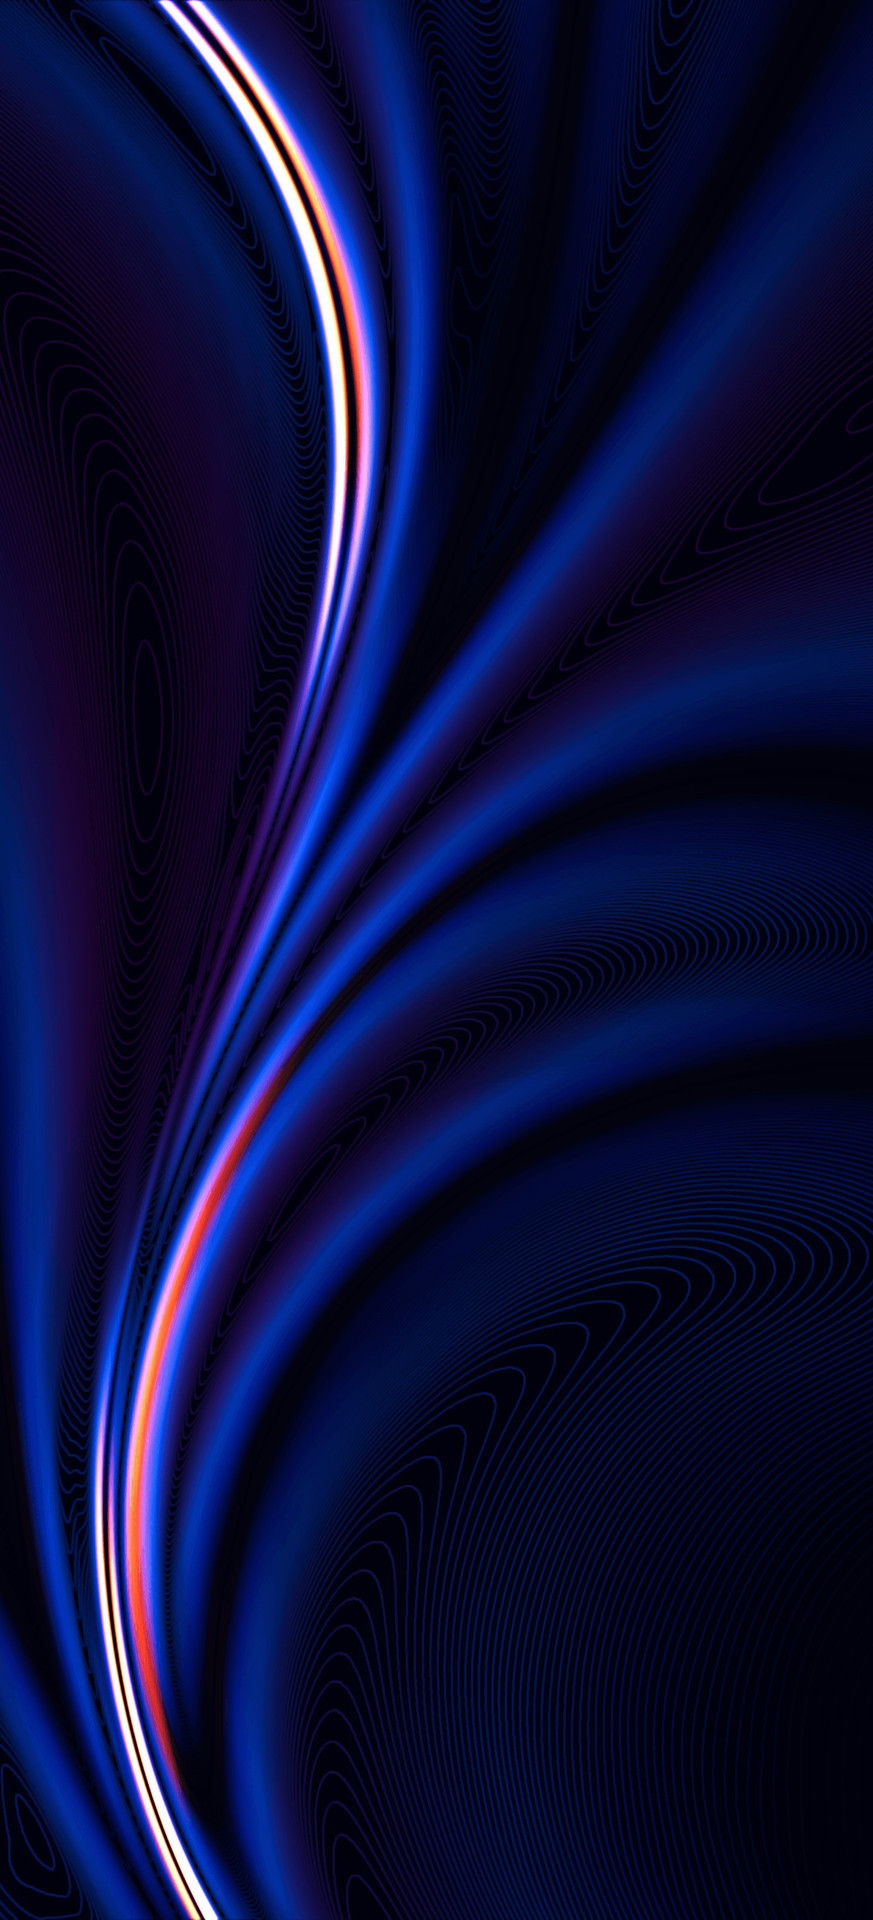 OnePlus 8 official wallpapers 8